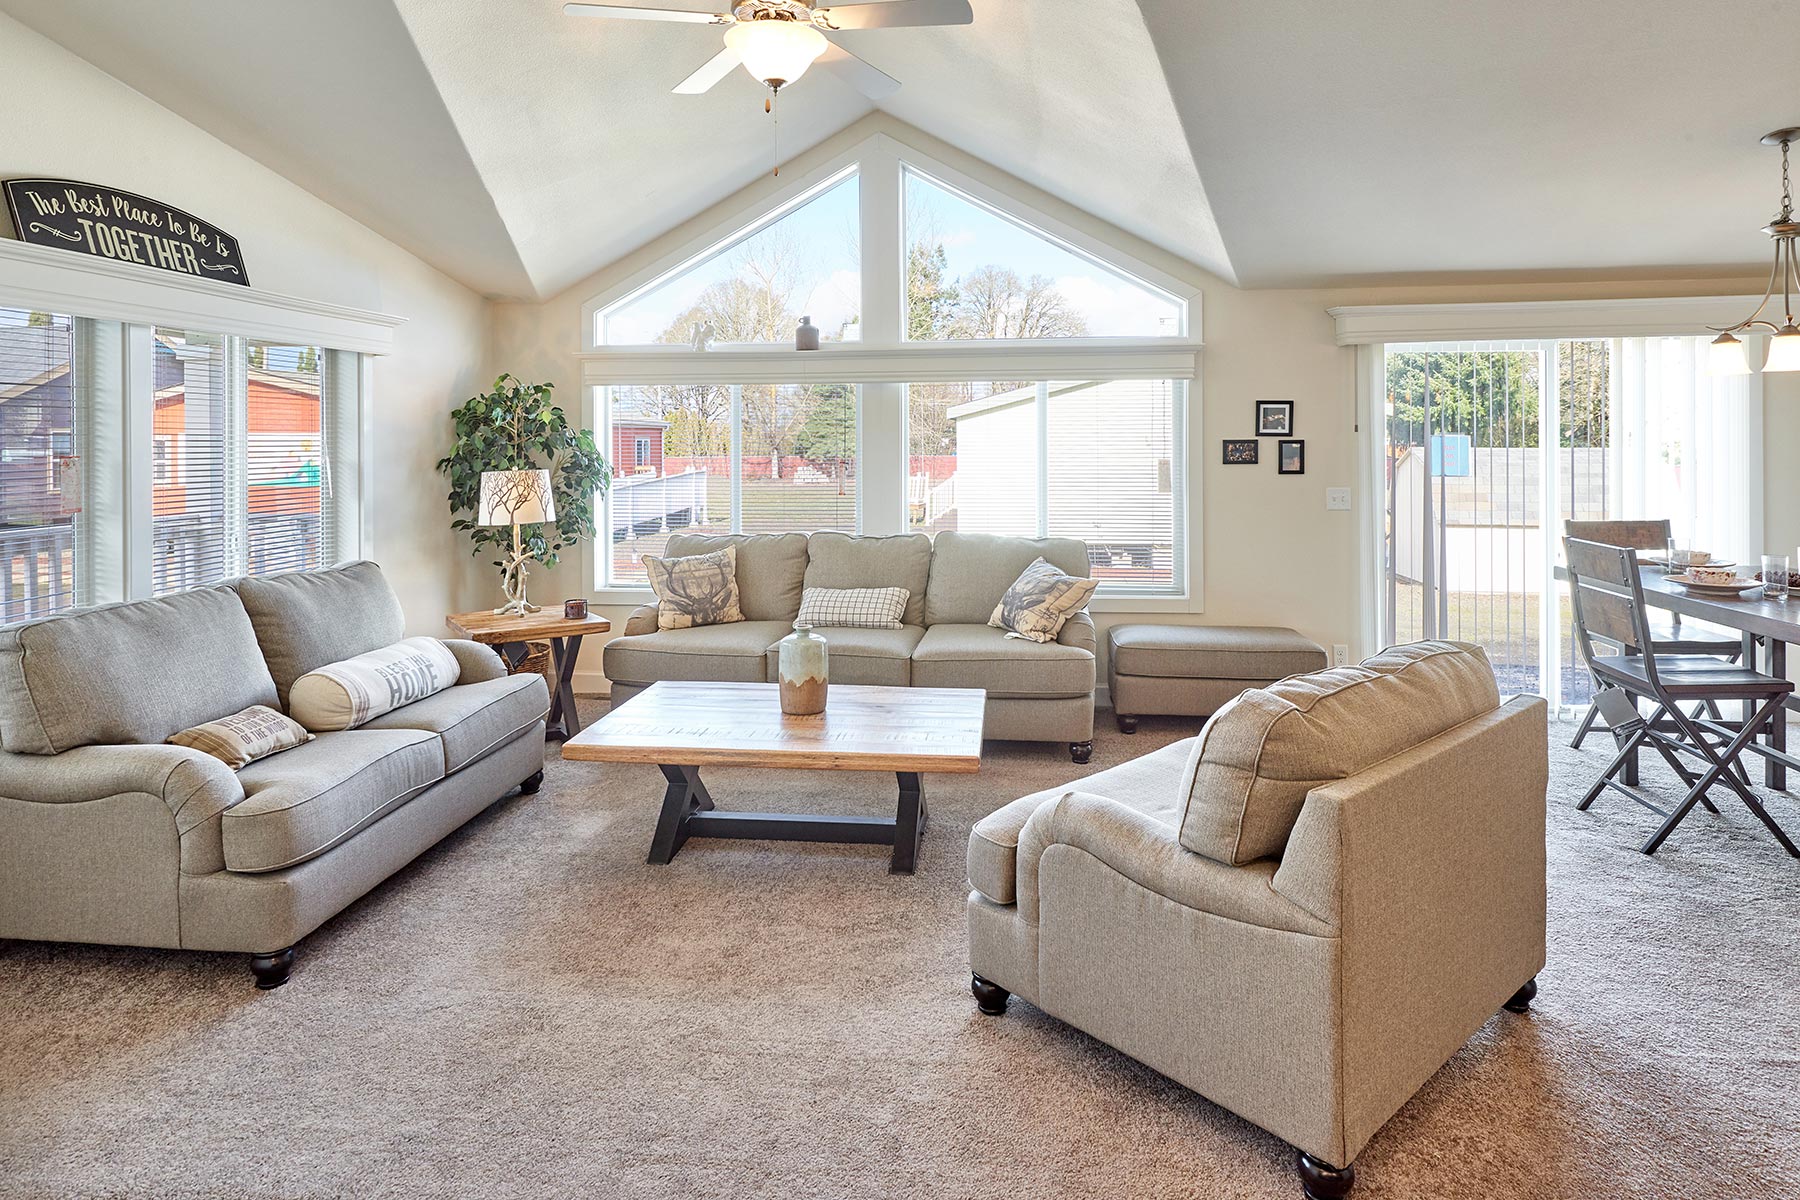 Skyline Homes Westridge 1218CT Manufactured Home Living Room featuring large windows, carpet flooring, and vaulted ceiling